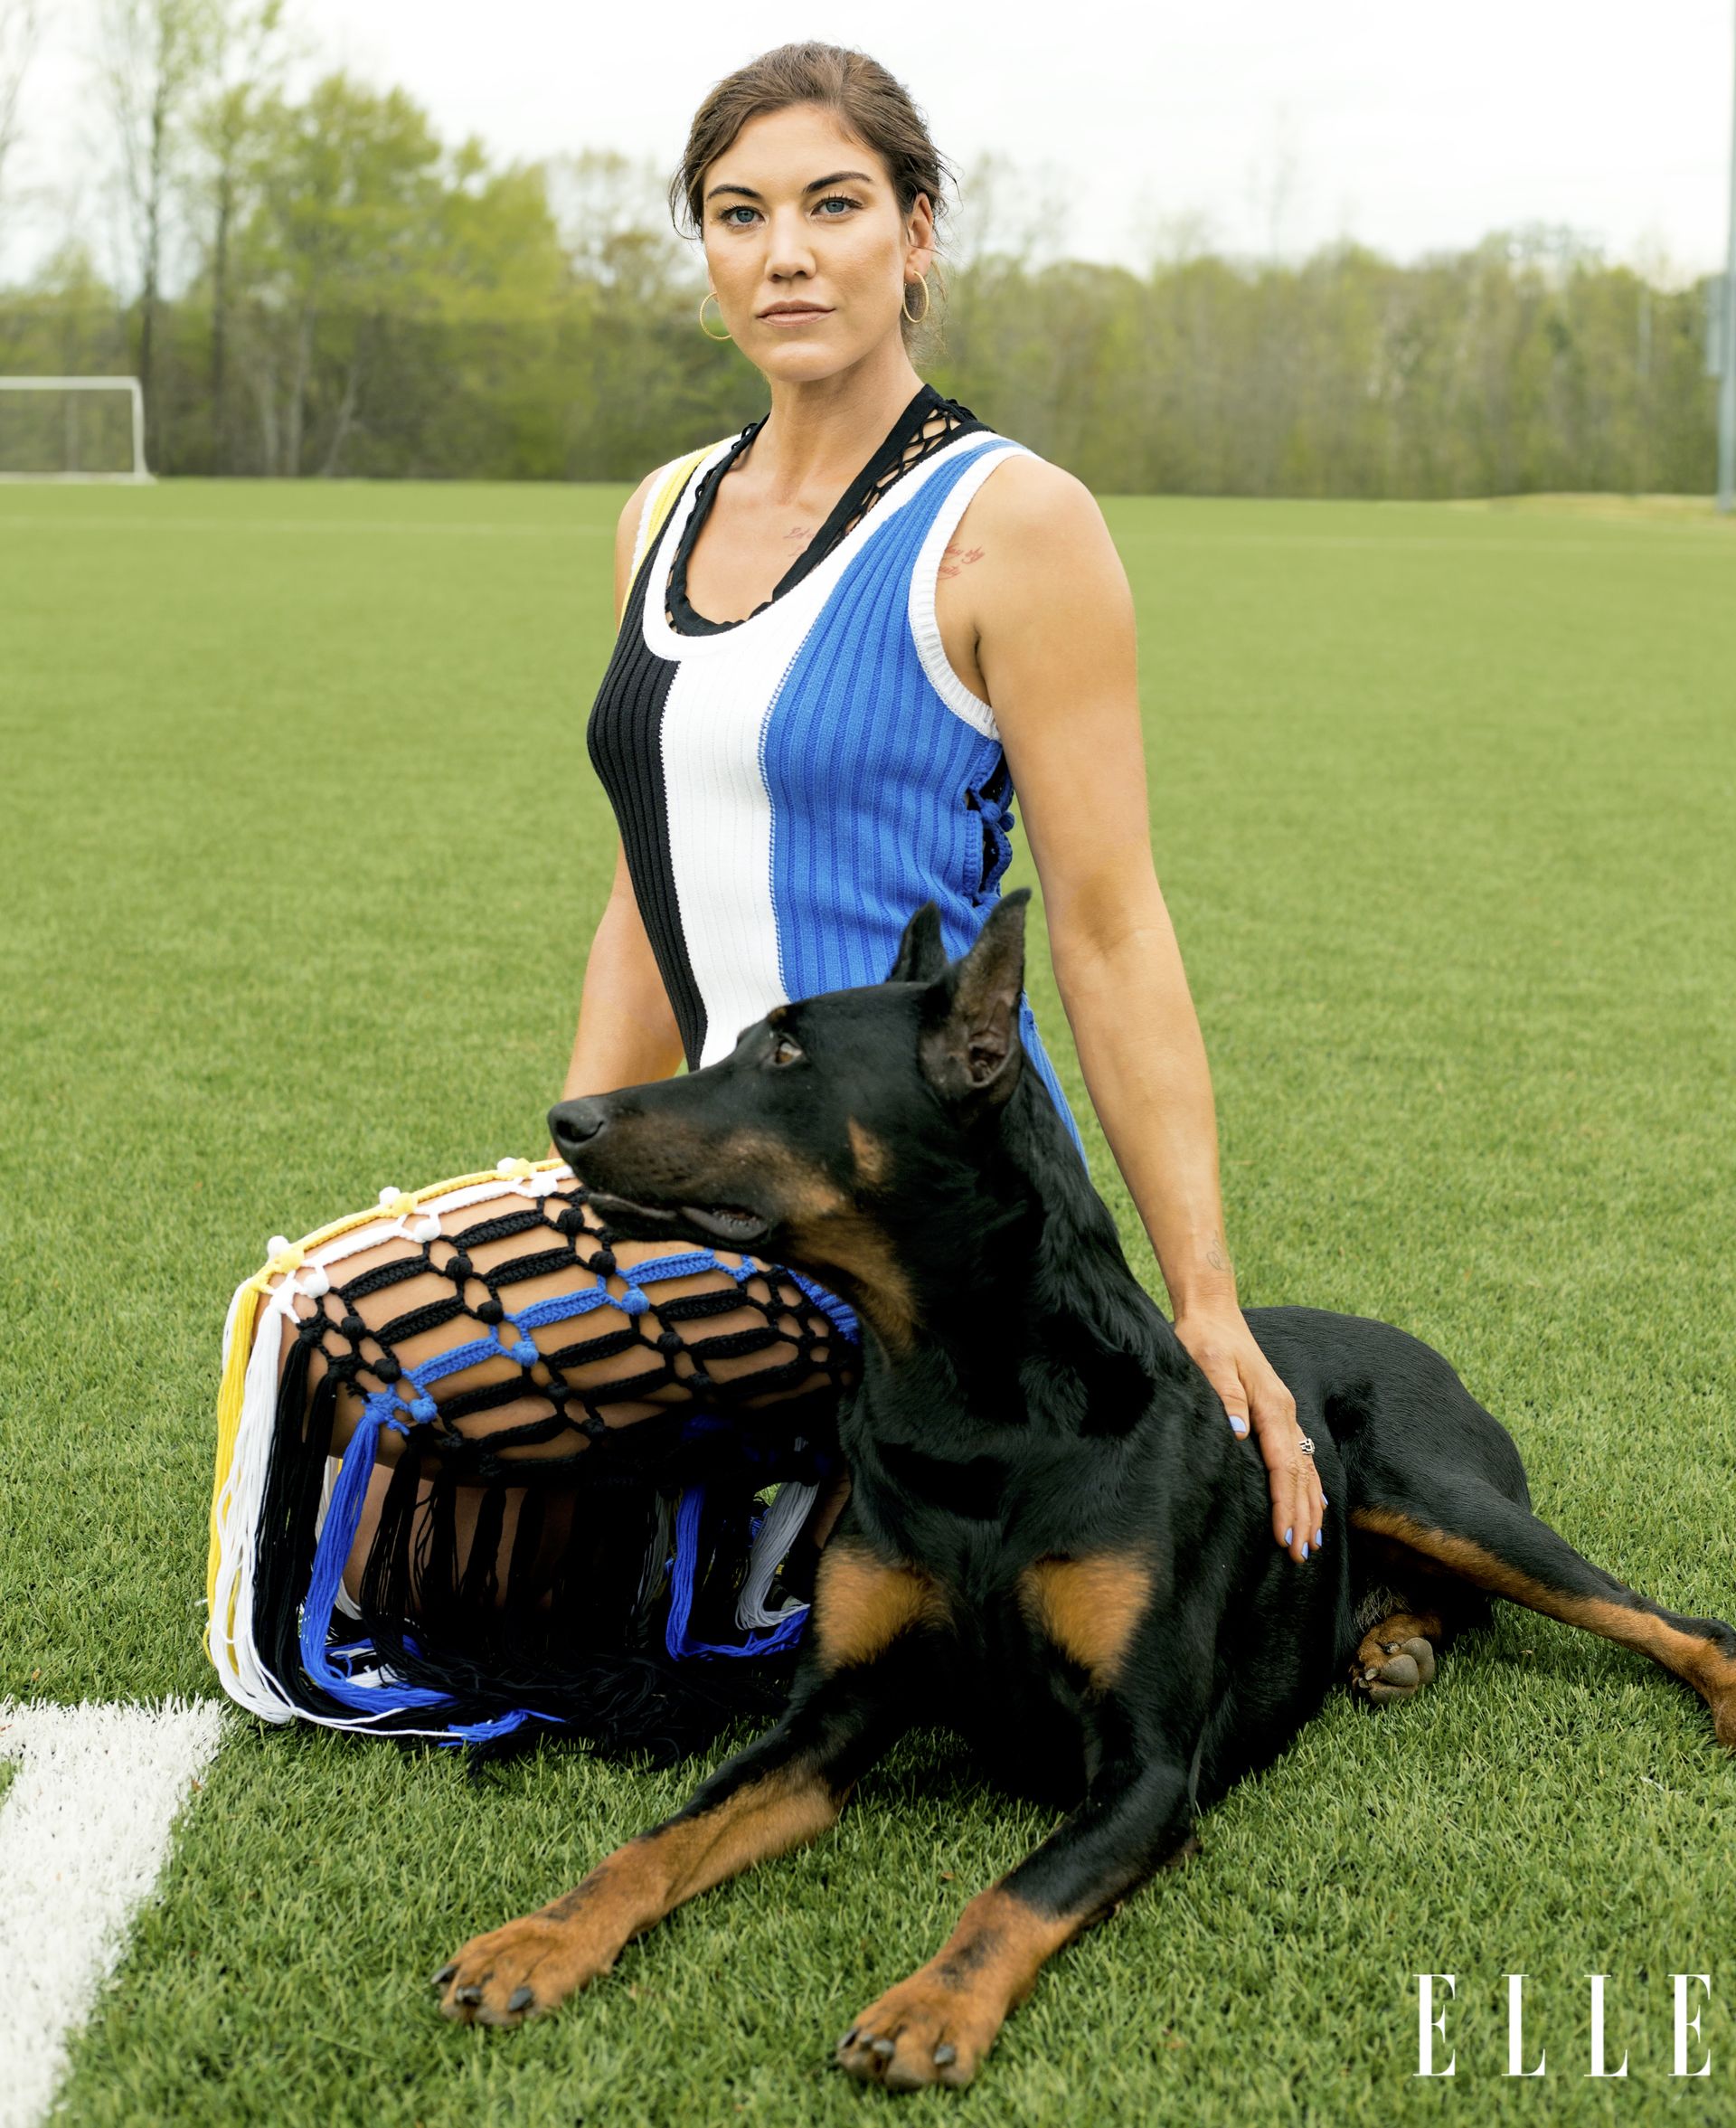 Solo picture hope Hope Solo